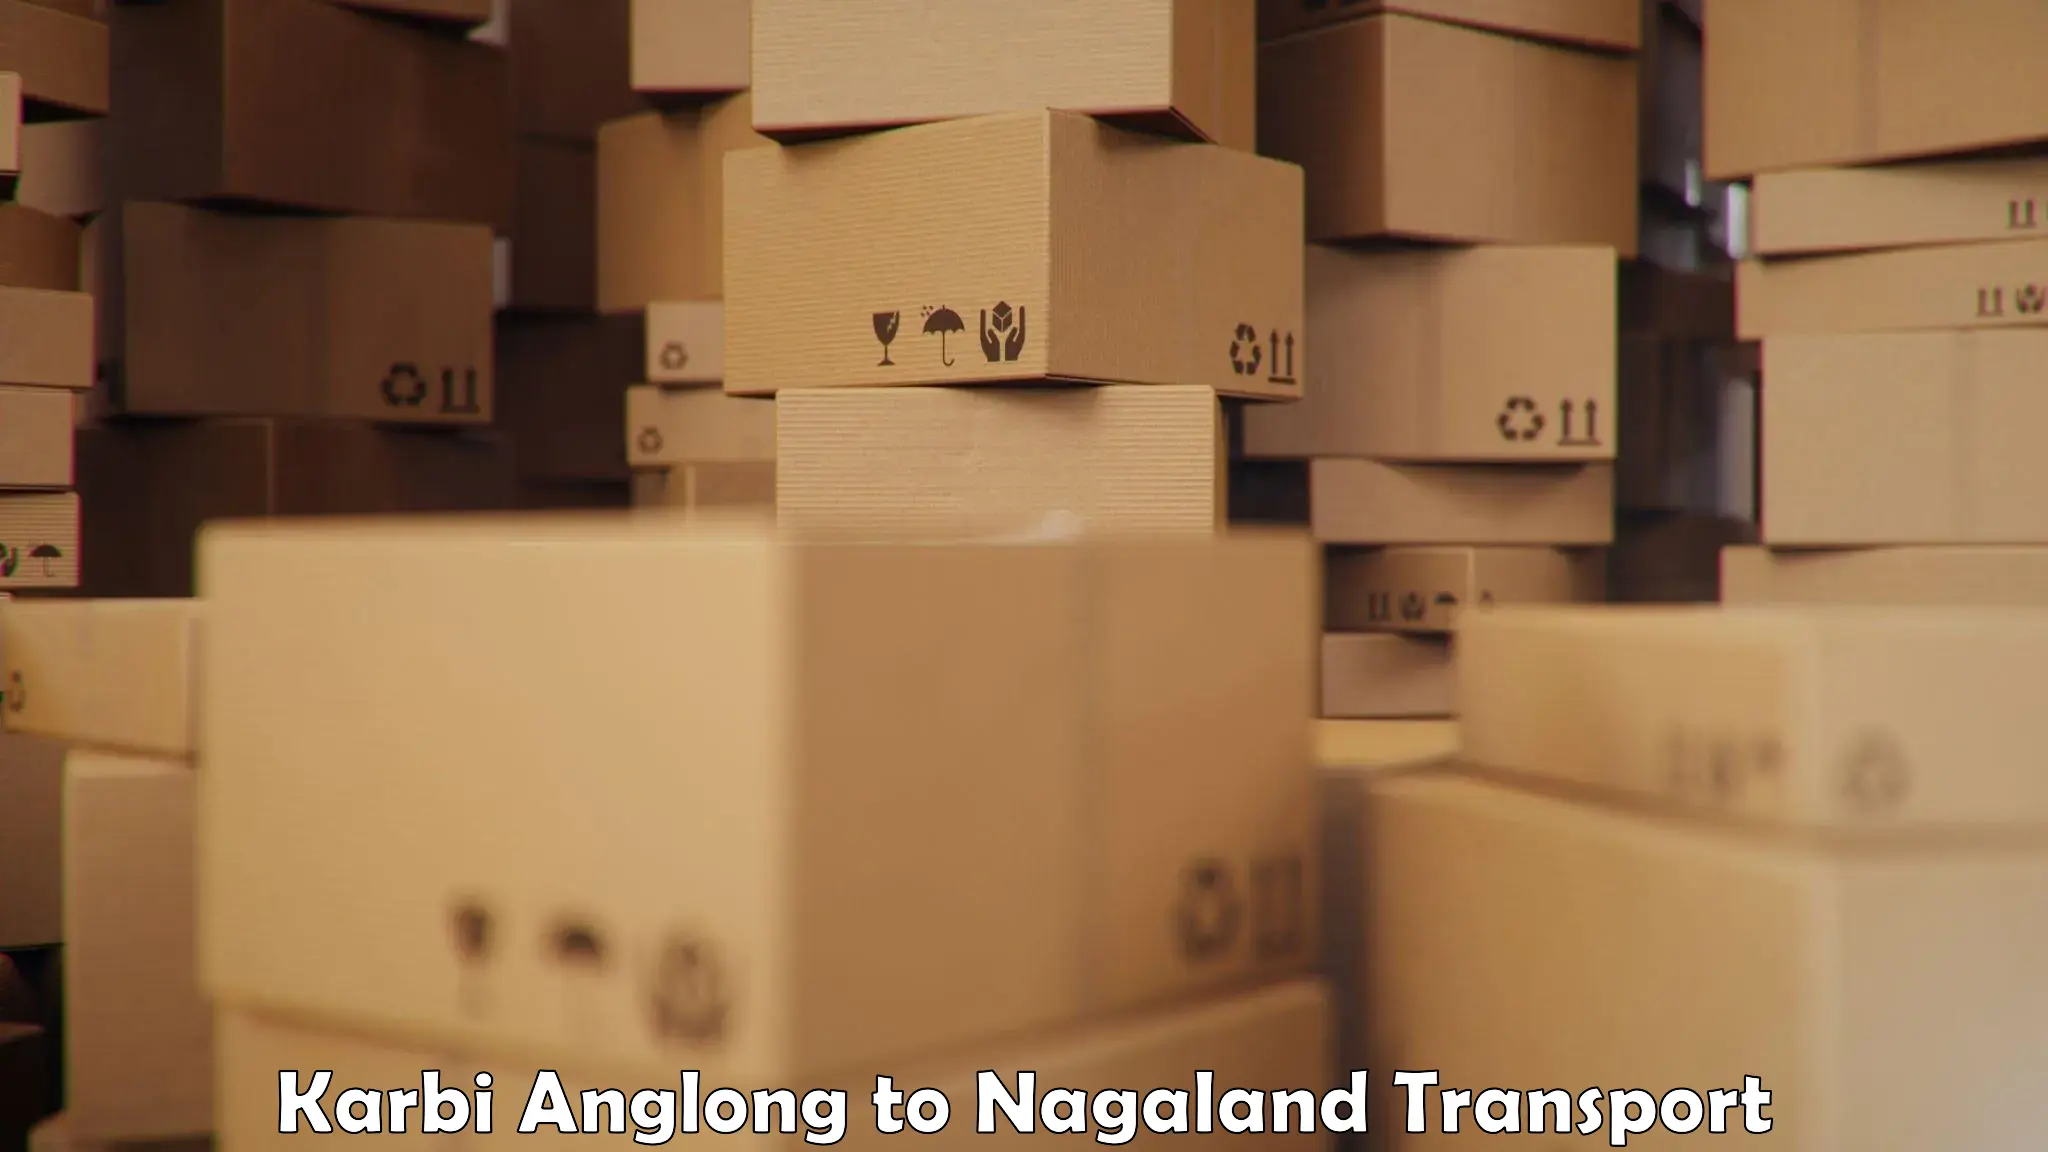 Goods delivery service Karbi Anglong to Nagaland